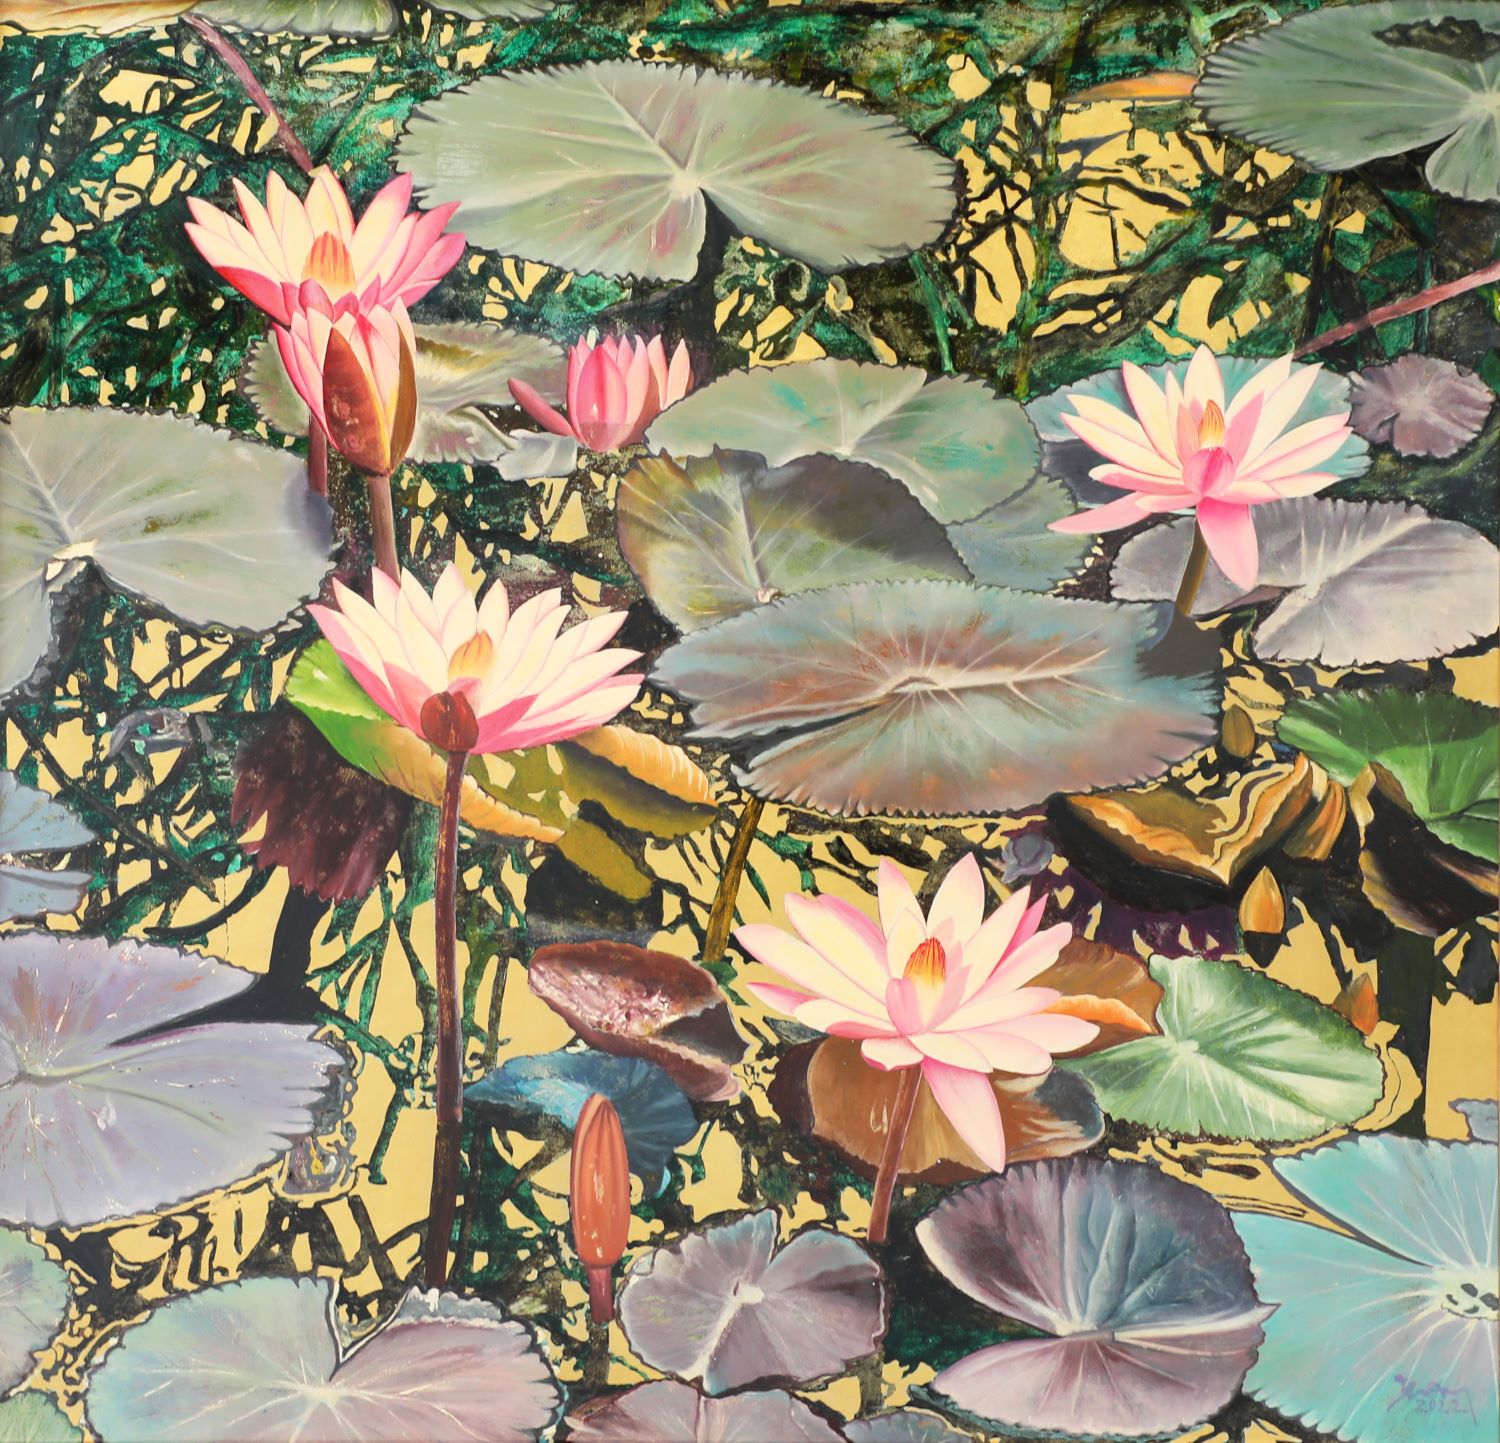 Noble Lotus - Vietnamese Lacquer Painting by Artist Nguyen Xuan Viet